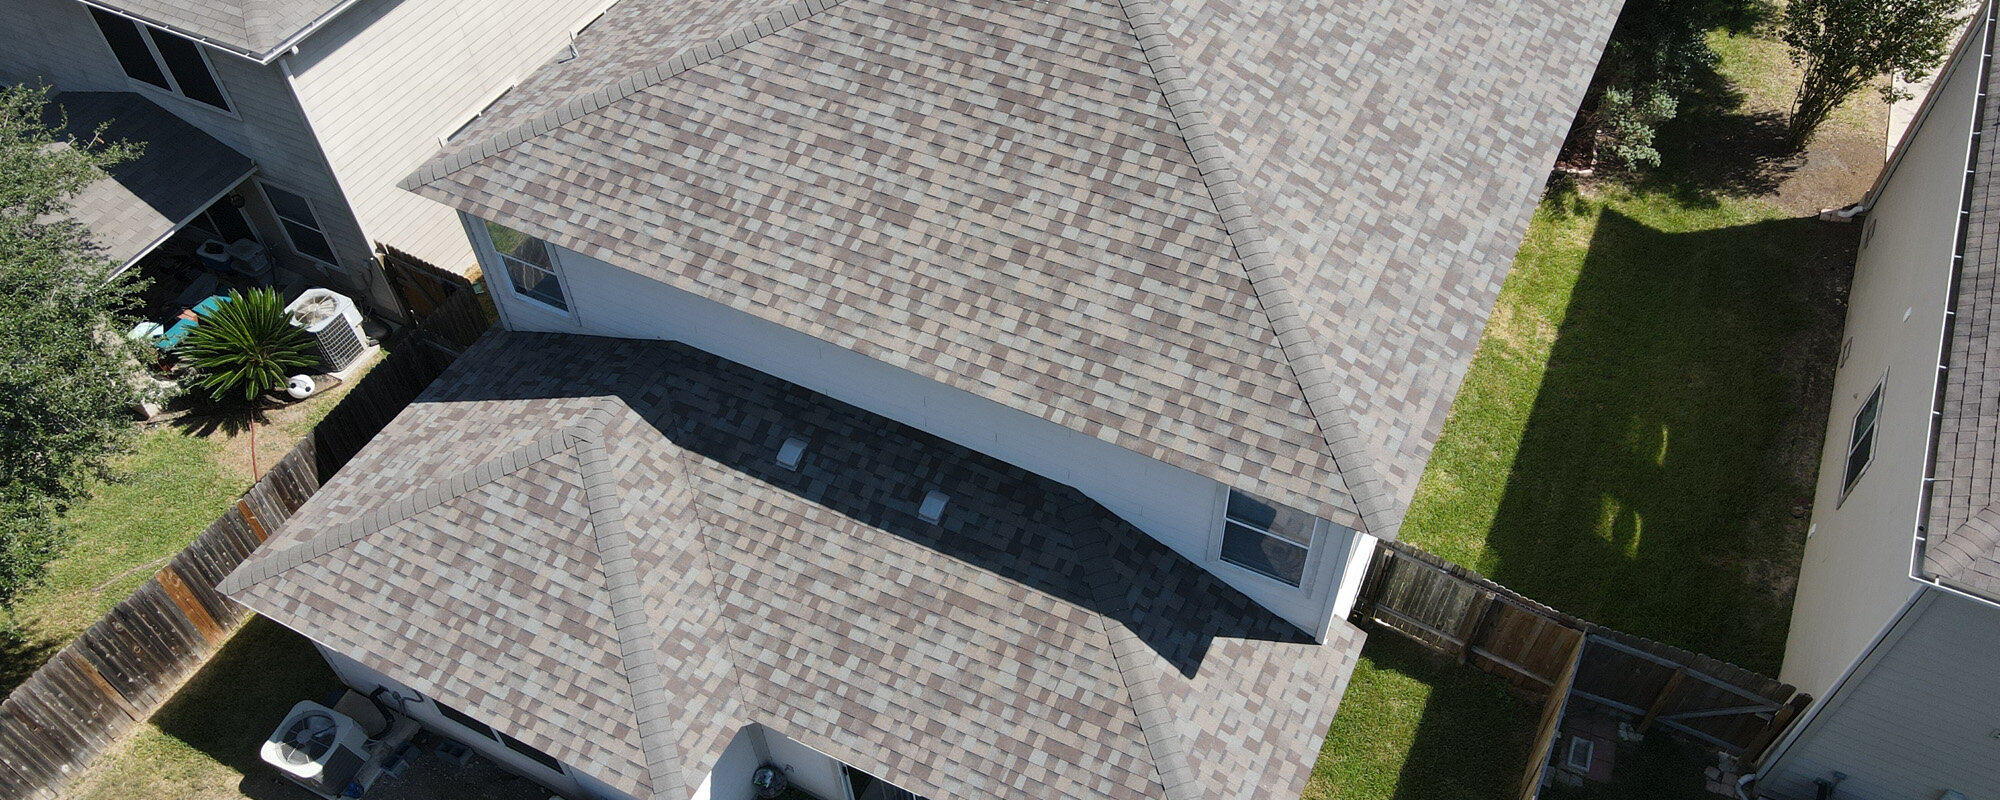 roofing company uncommonly successful